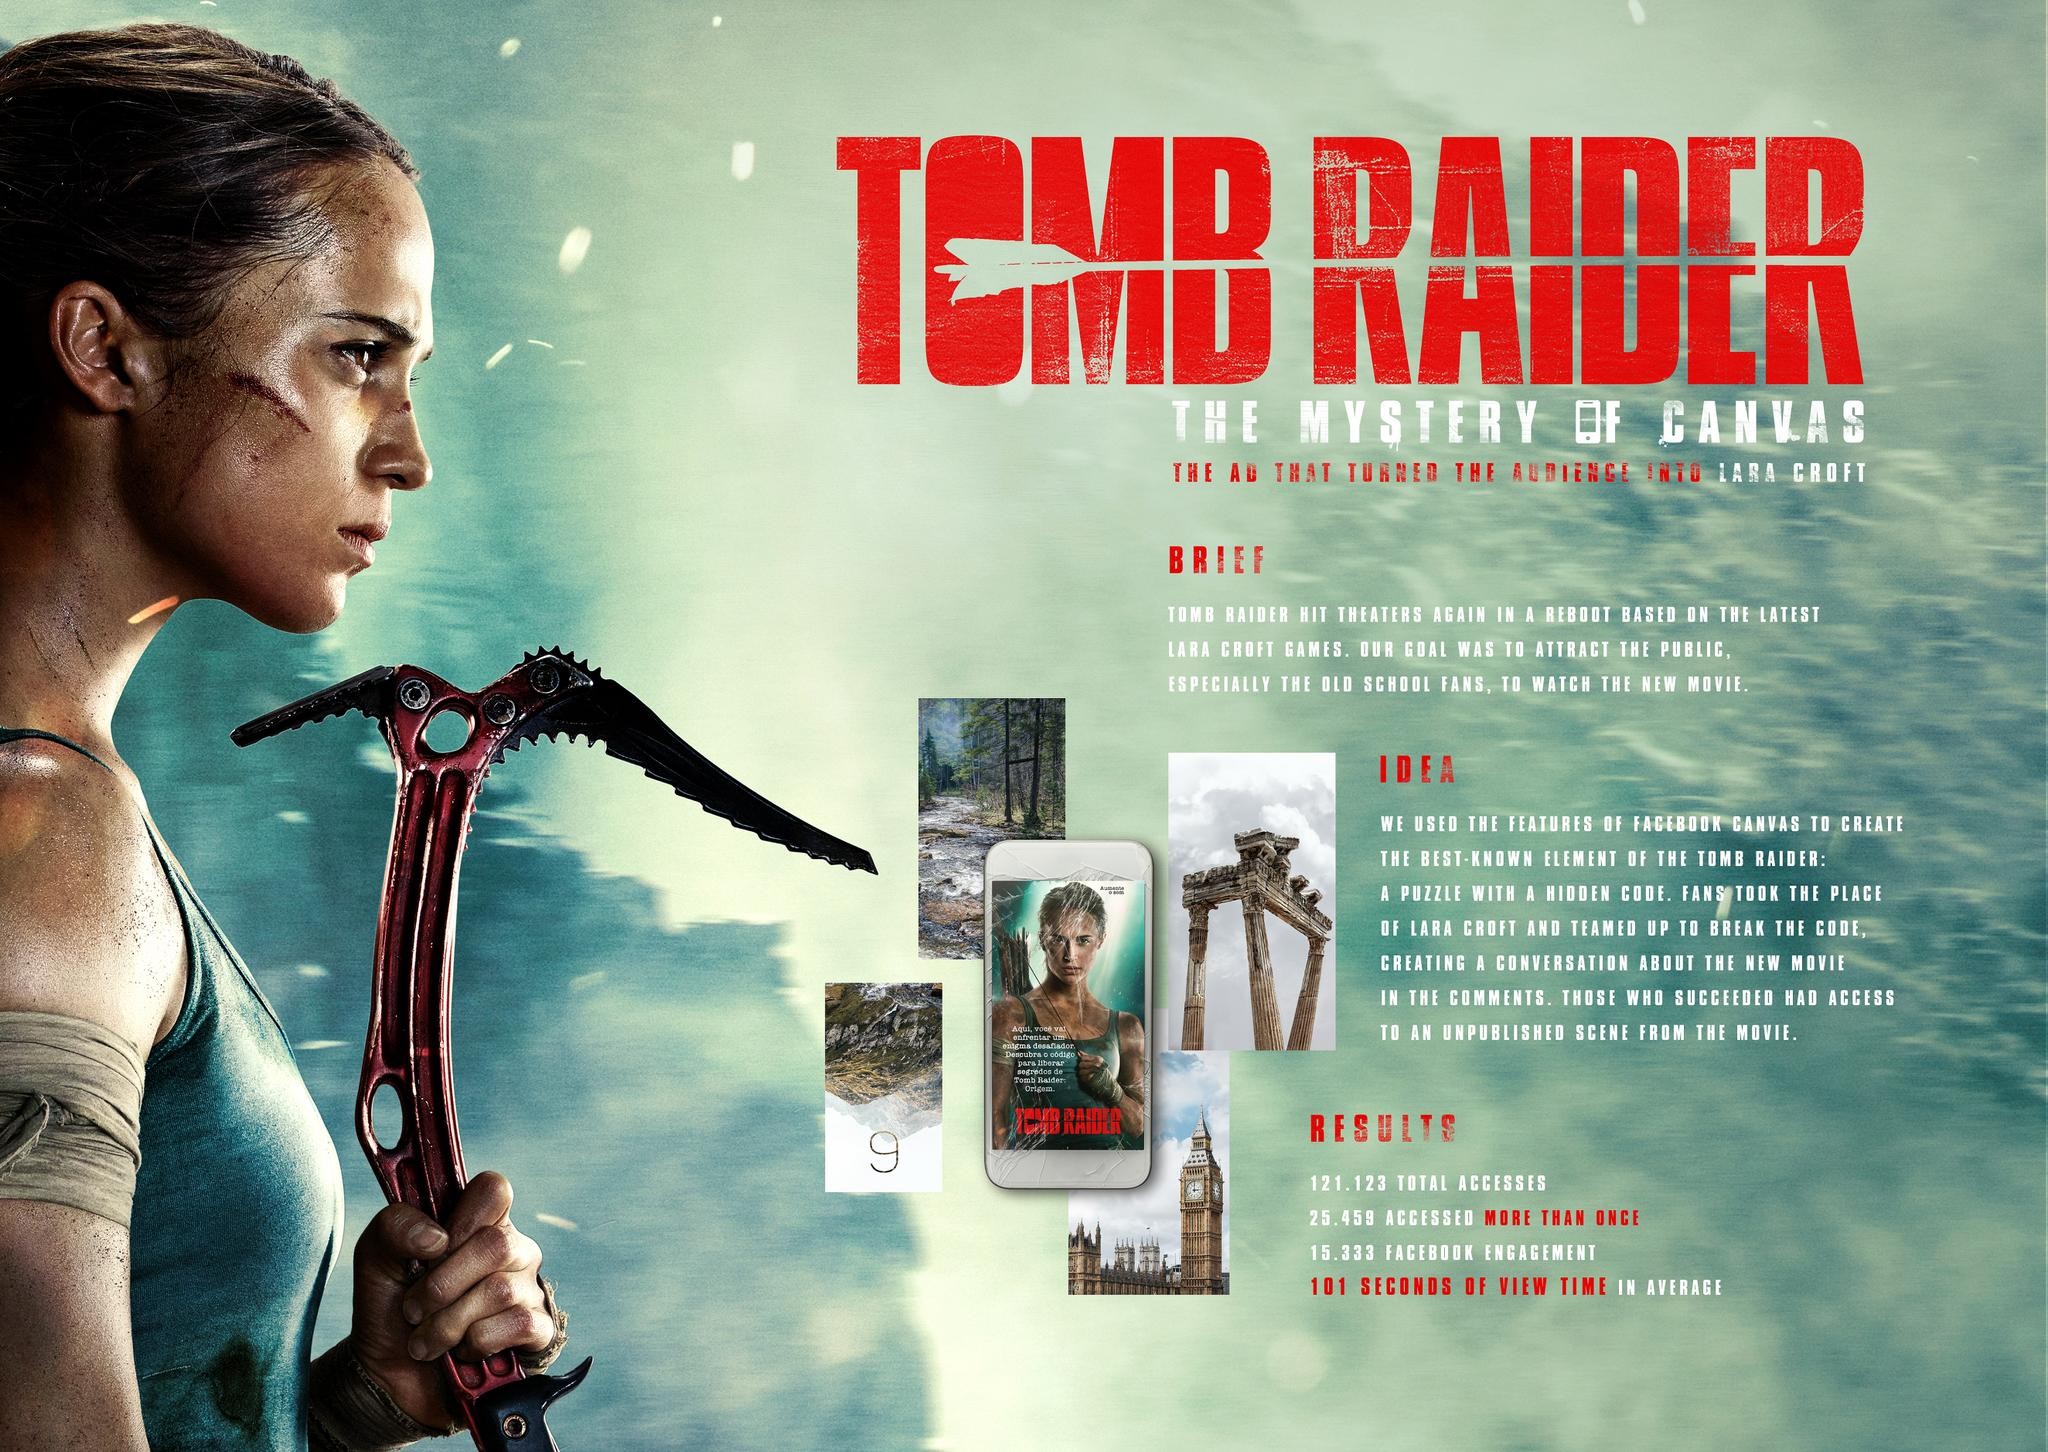 Tomb Raider: The mystery of the canvas